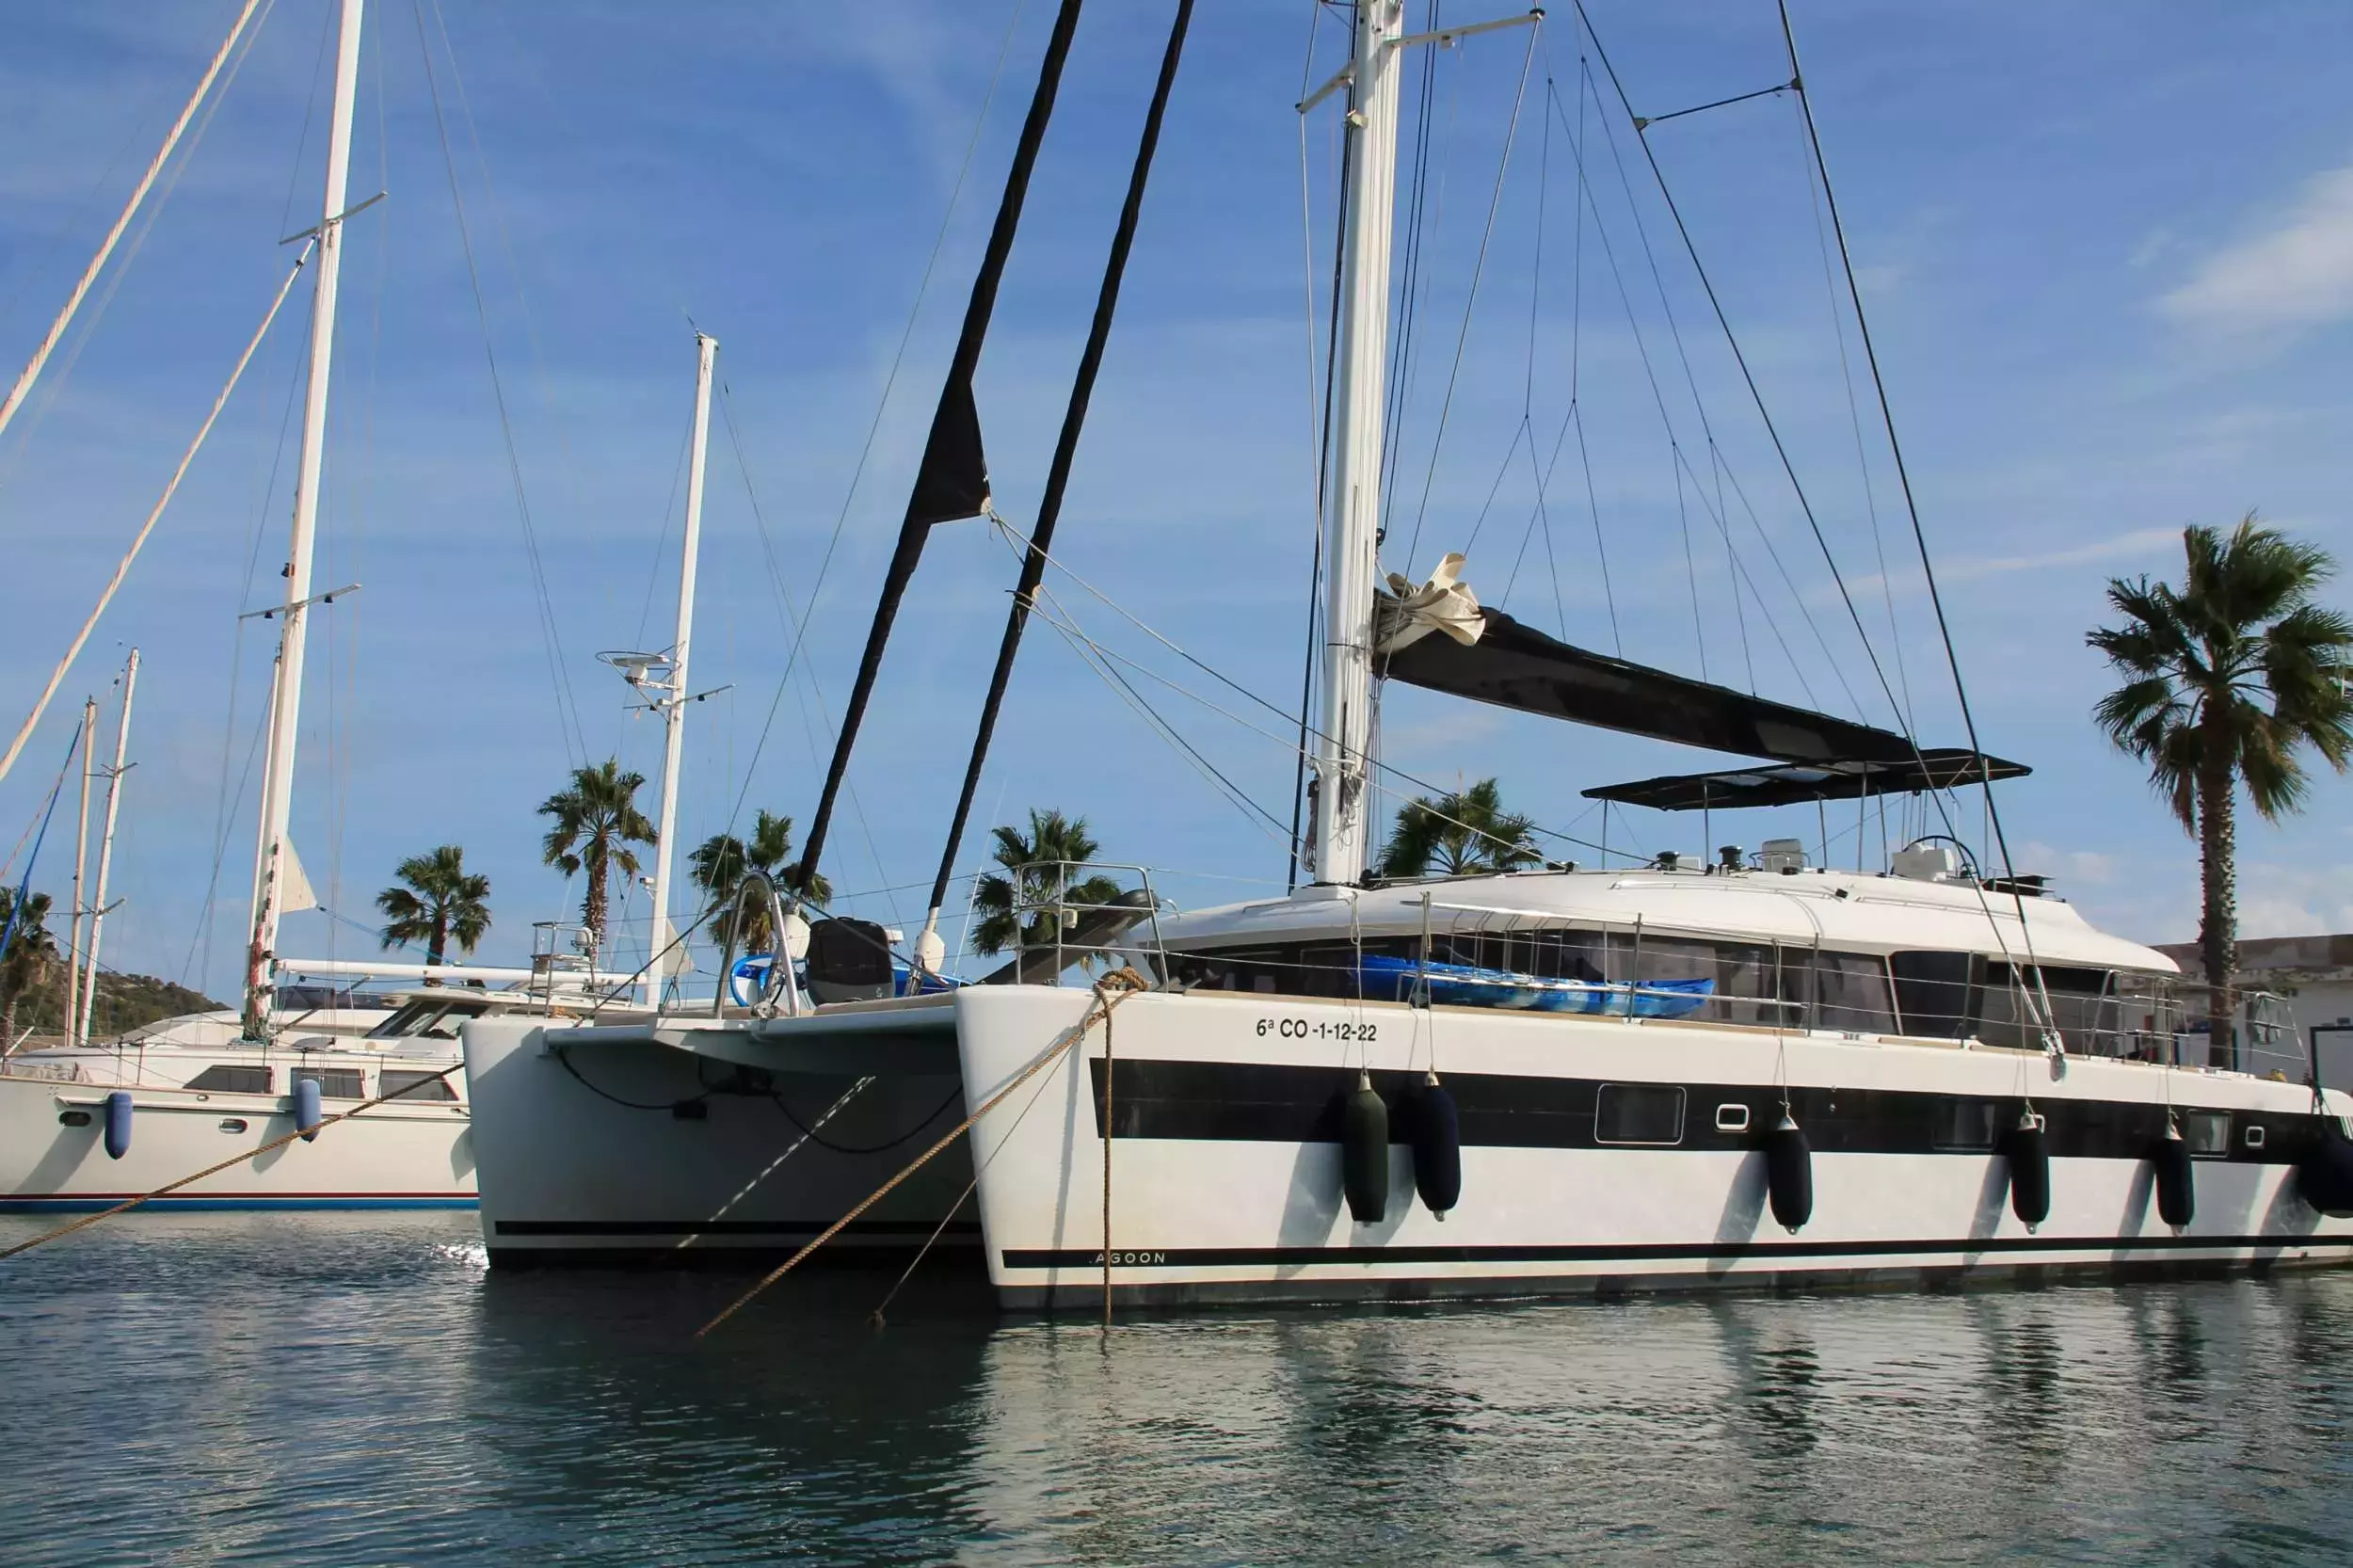 Jarana by Lagoon - Top rates for a Charter of a private Sailing Catamaran in St Barths